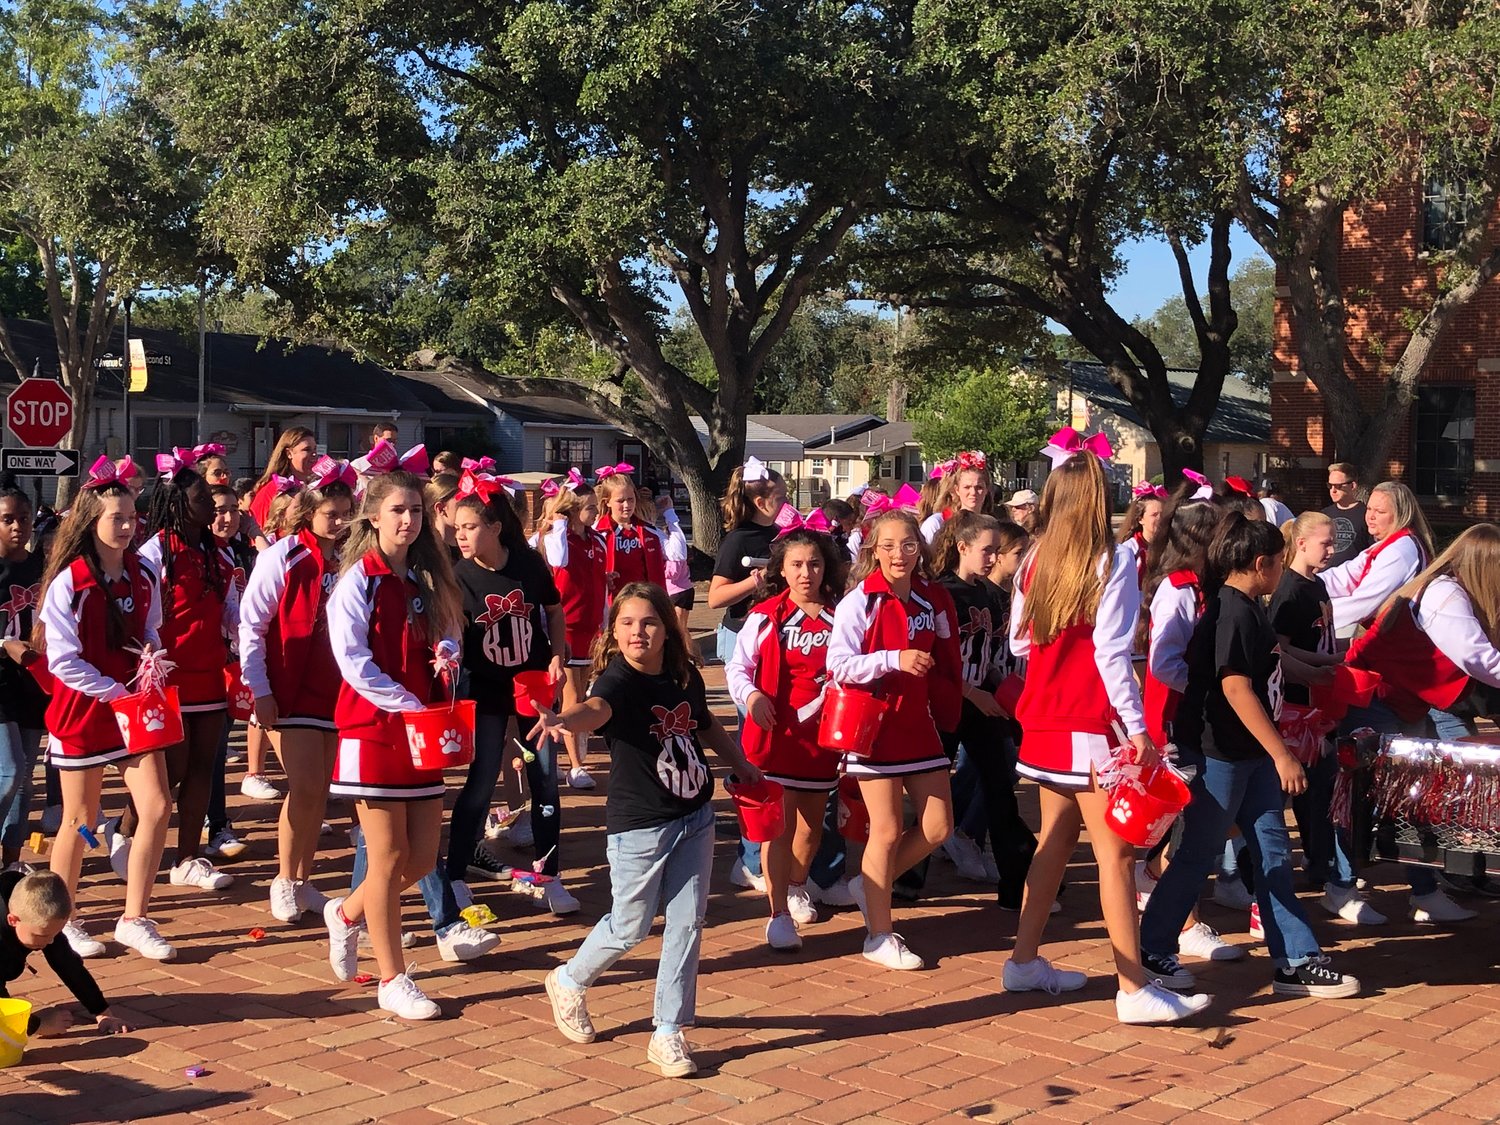 Cheerleaders from Katy Junior High brought their spirit to the parade.